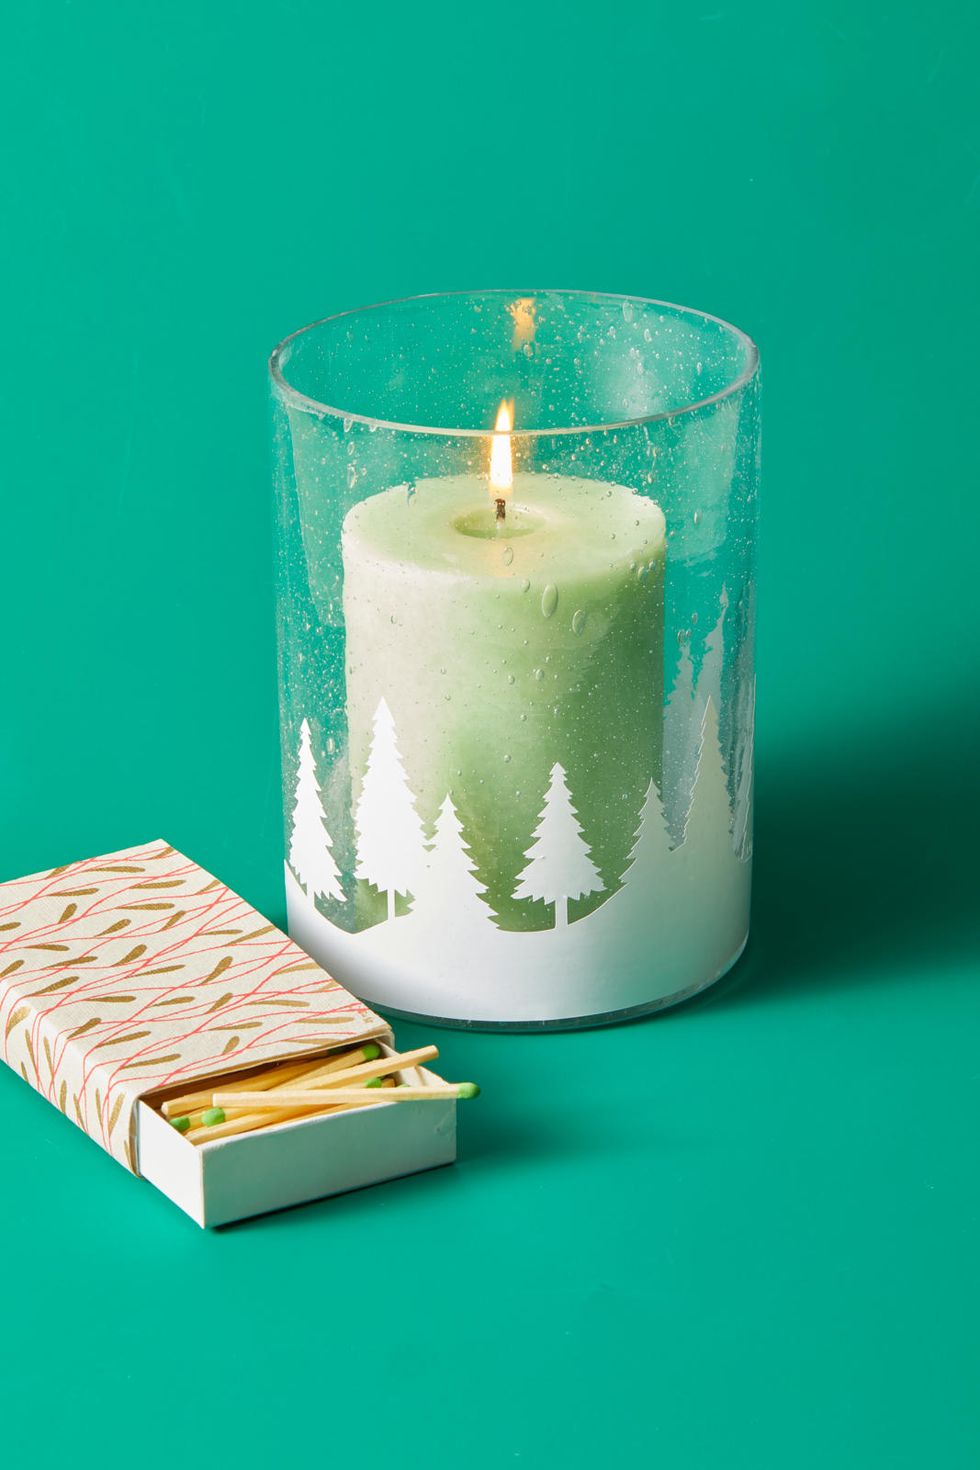 DIY Gifts They'll Rave About: One Sheet Wonder